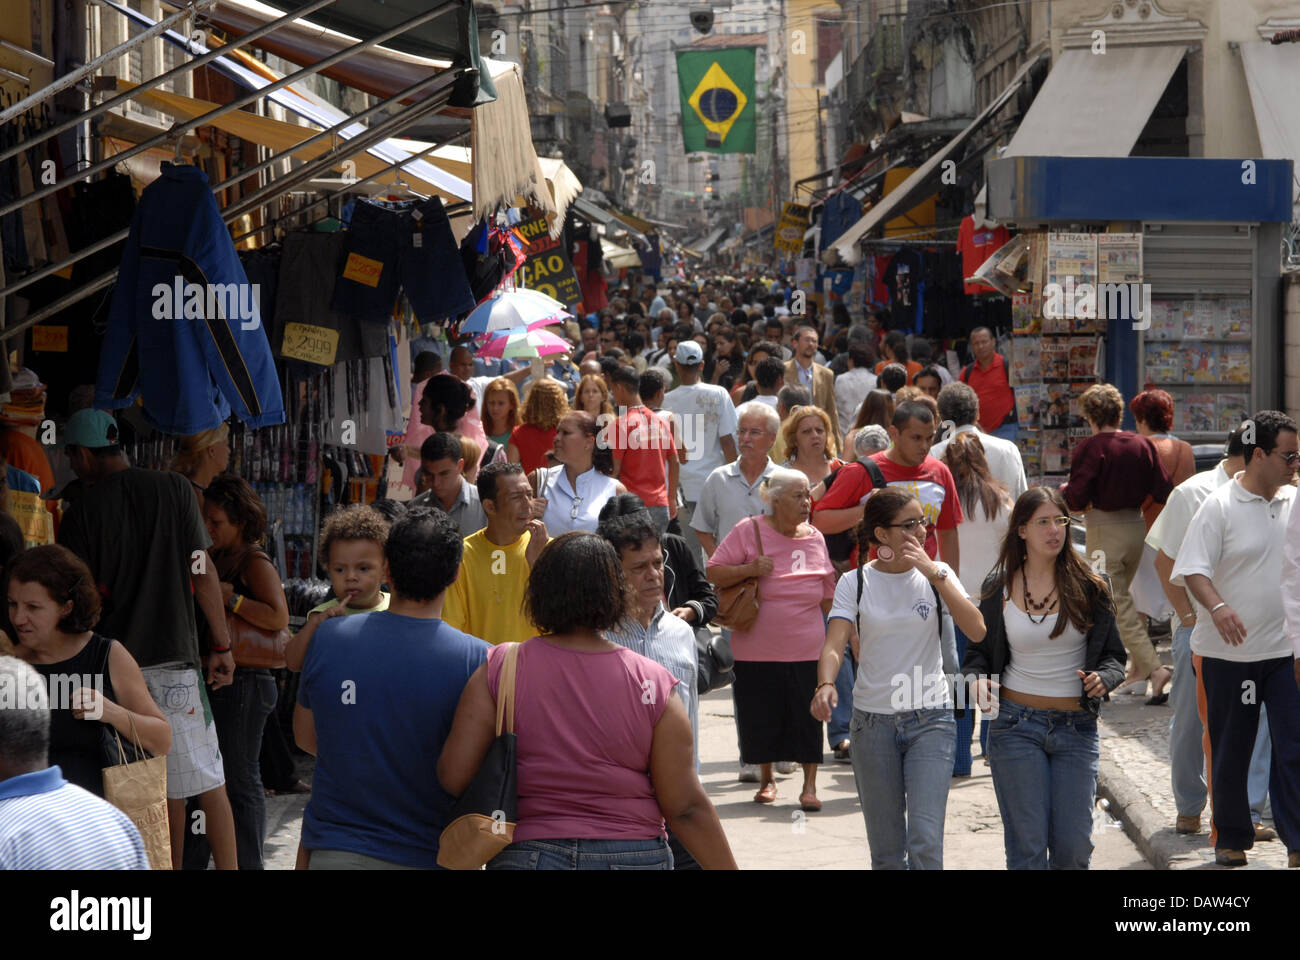 People shop the Rua da Alfandega (Customs Street) in downtown Rio de Janeiro, Brazil, 30 October 2006. Shop owners mostly from lower social levels are situated here with their little shops. Photo: RiKa Stock Photo